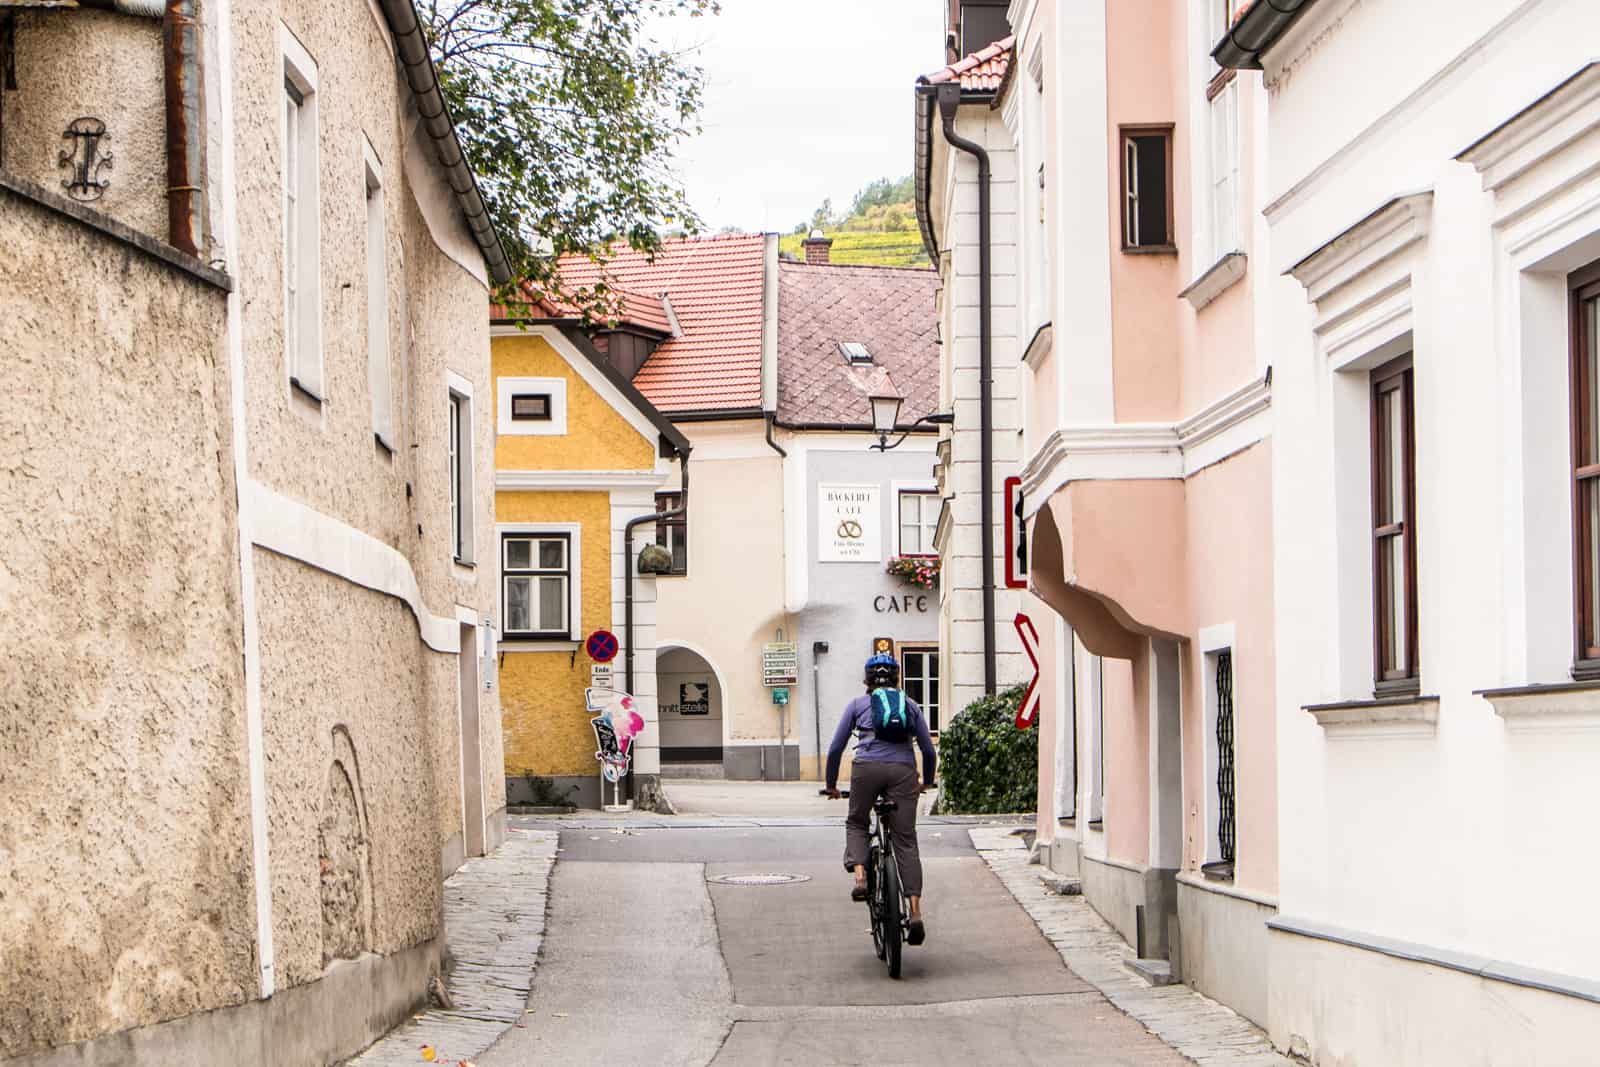 A woman cycles through the small and wonky pink and orange pastel buildings in Krems, Austria